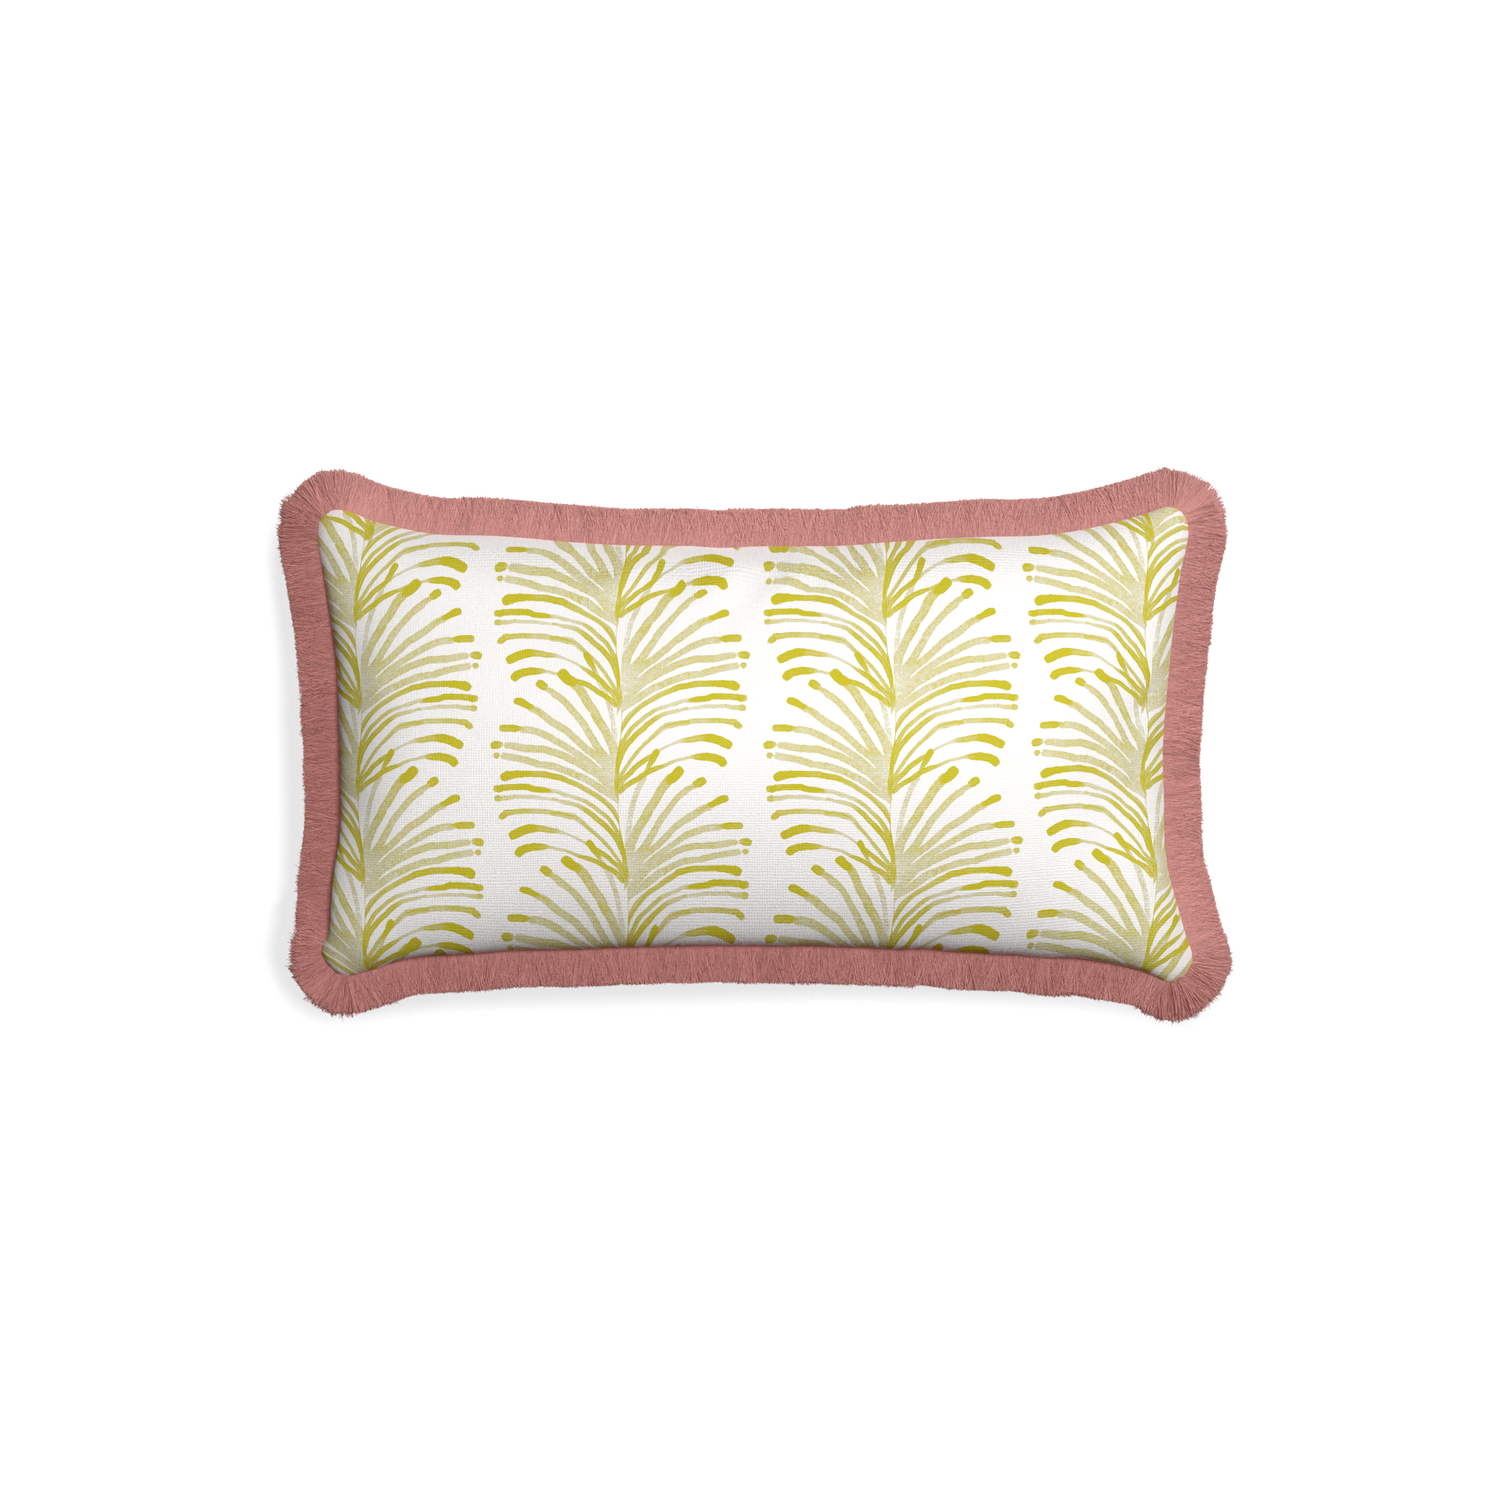 Petite-lumbar emma chartreuse custom yellow stripe chartreusepillow with d fringe on white background